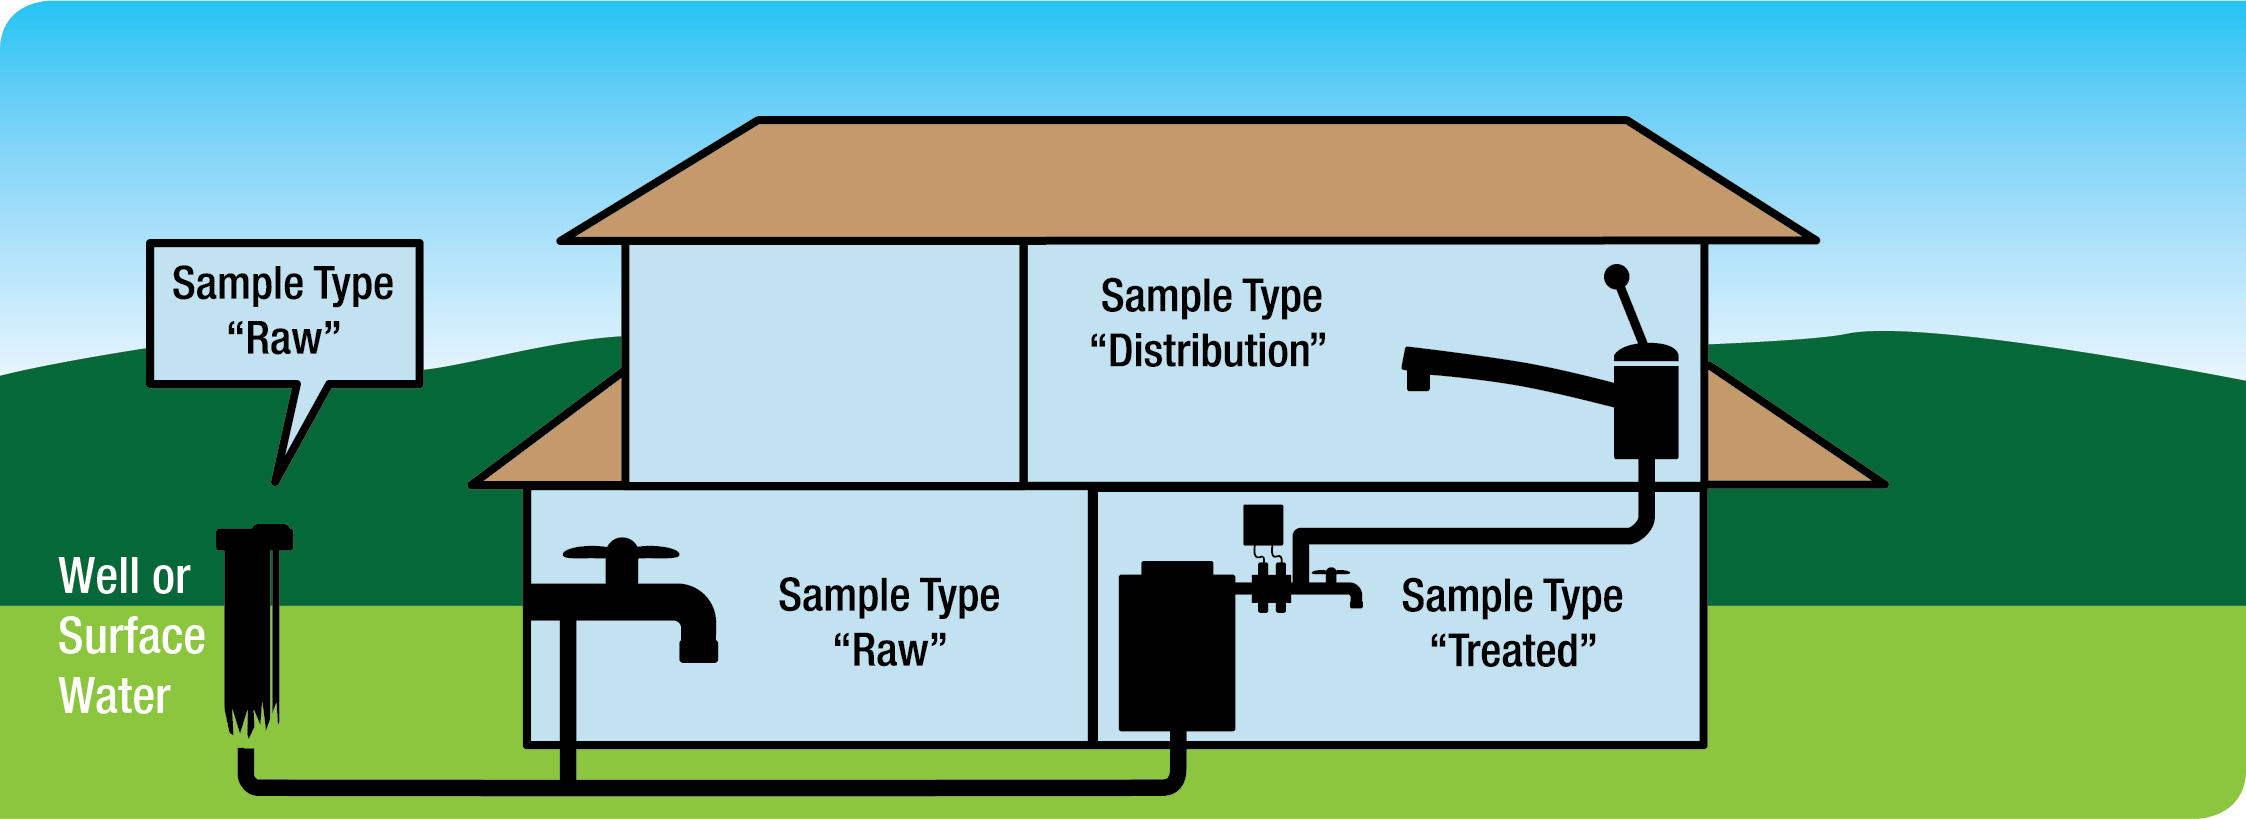 This is a picture which illustrates the sampling locations for a designated facility with one building. Within the picture water is drawn from a well with treatment located in the basement. The well is labelled as sample type raw. The tap directly after treatment in the basement is labelled as sample type treated. The tap on the second floor of the building is labelled as sample type distribution.